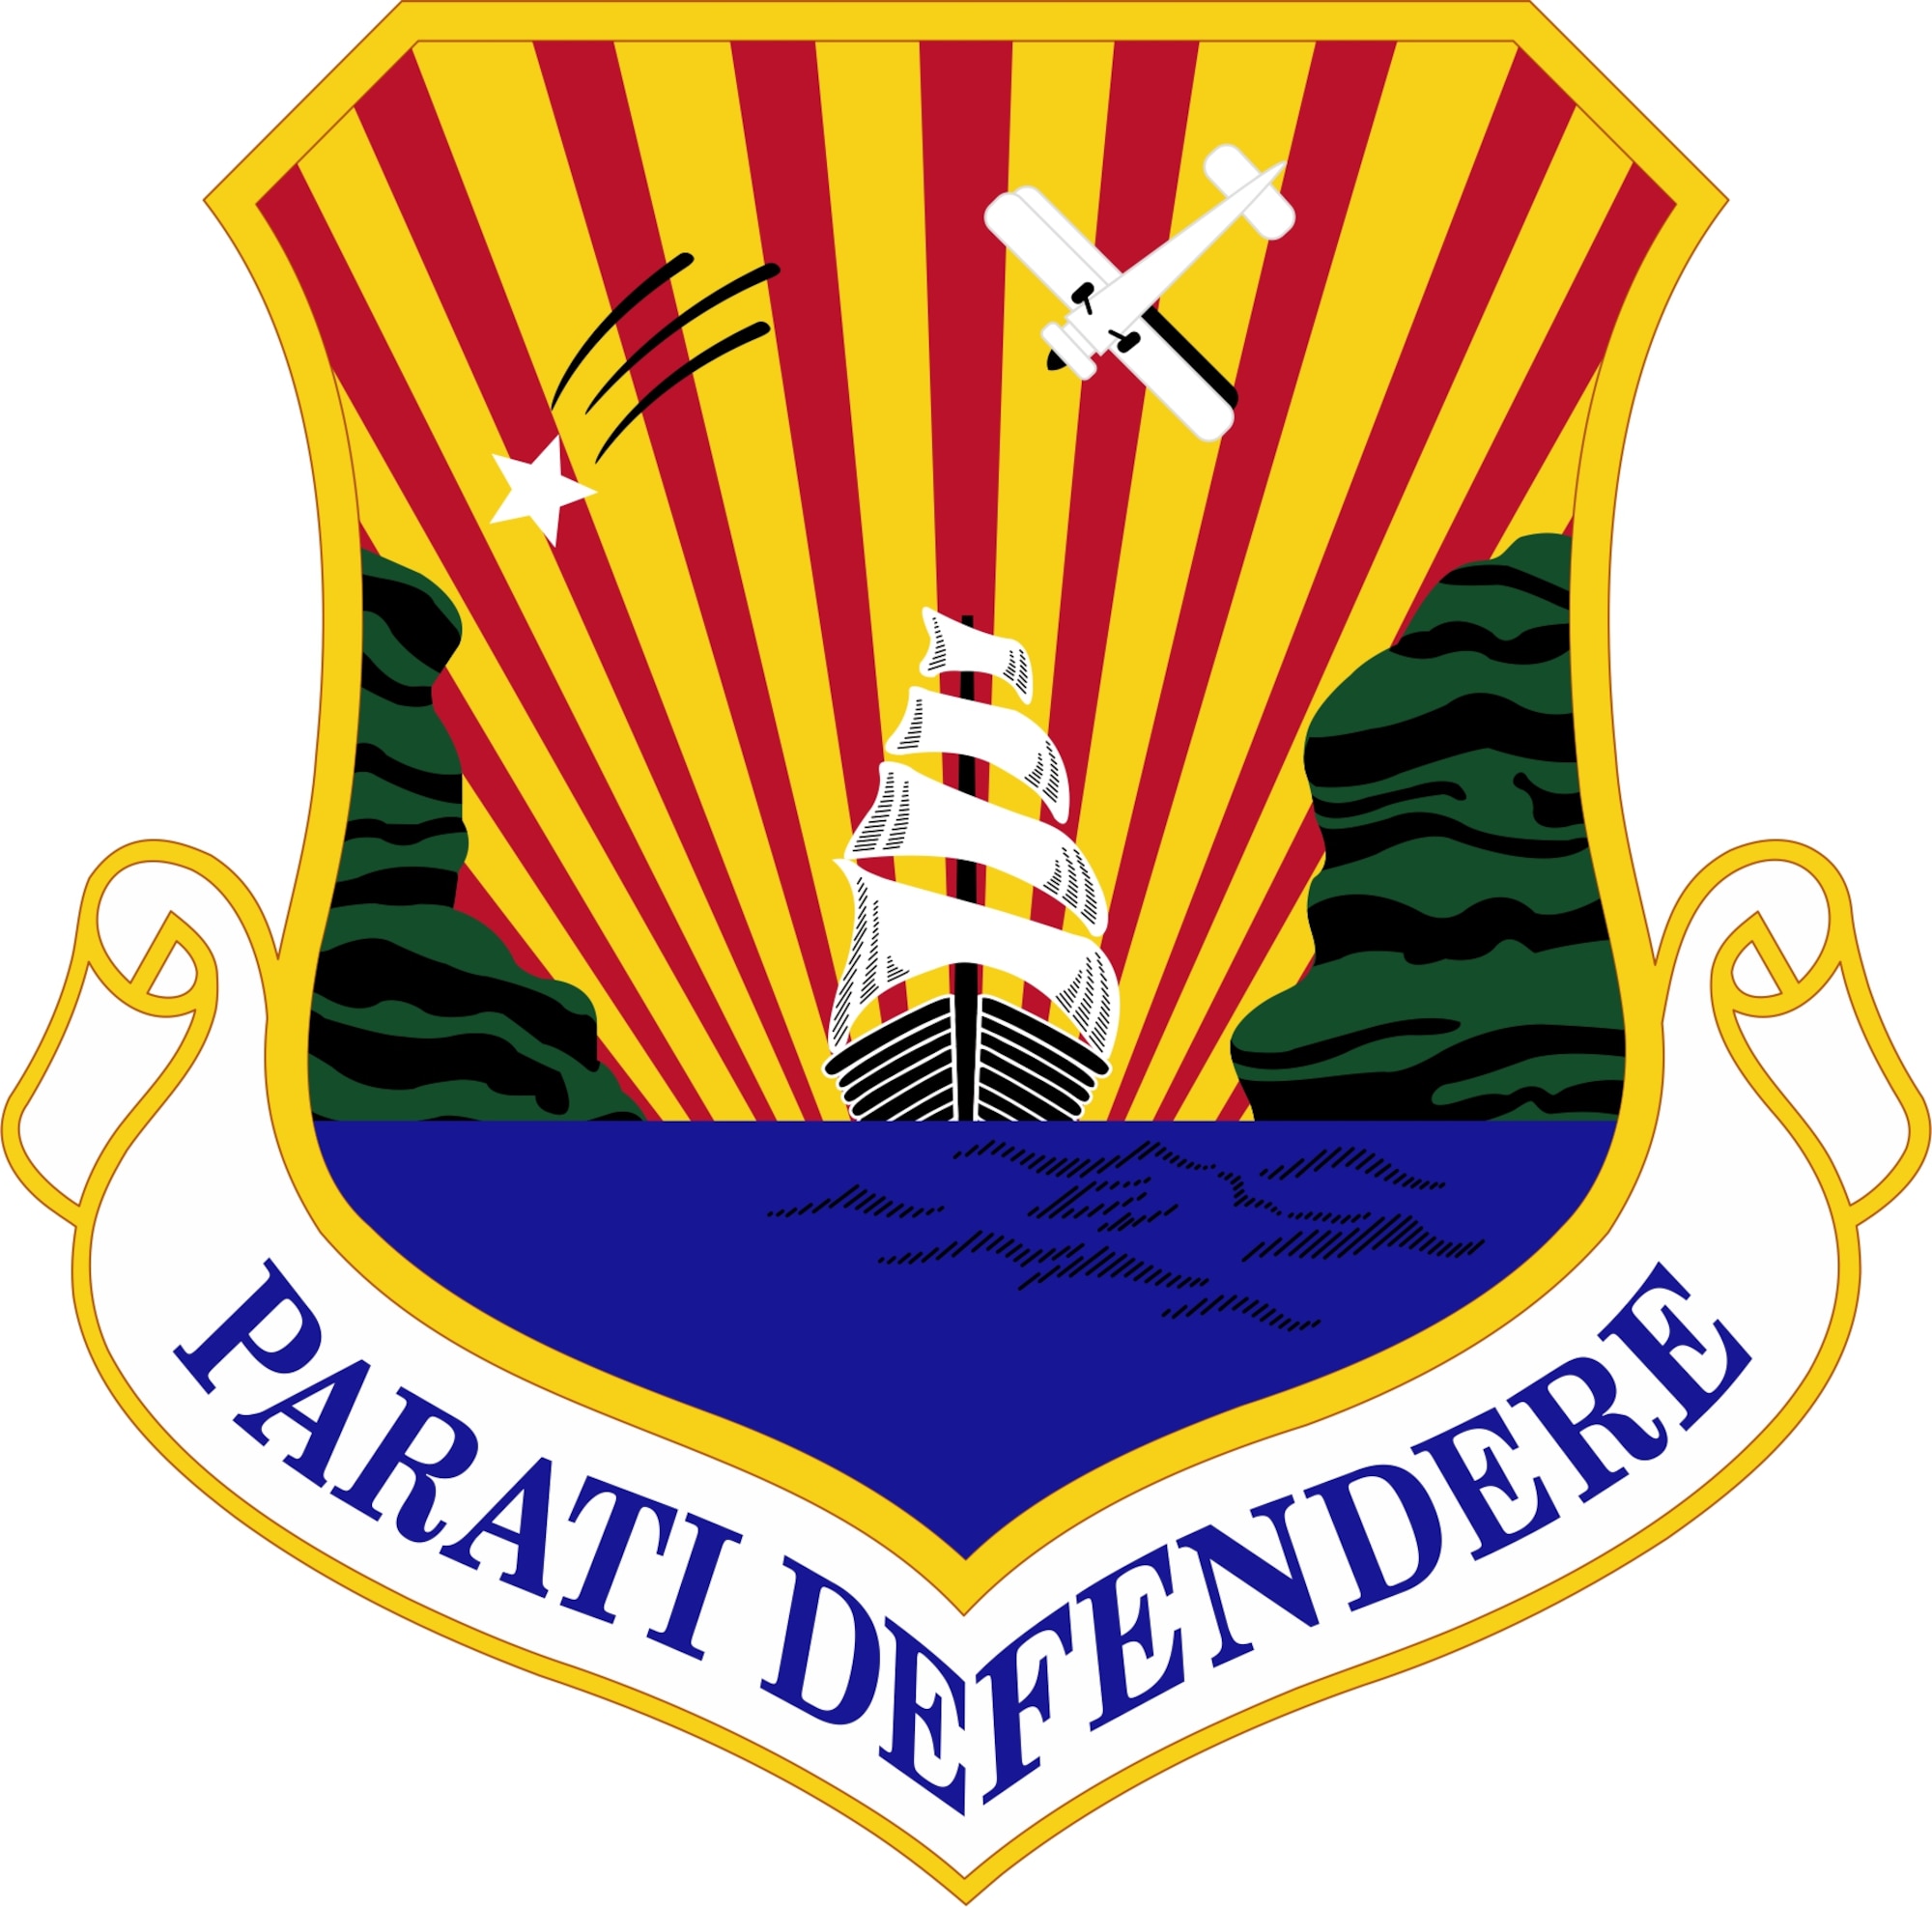 This year marks the 100th anniversary of the unit presently designated the 6th Air Mobility Wing. The Wing’s emblem has changed little since its origin in the Panama Canal Zone. The emblem featured four elements – the group’s first aircraft, a full-mast sailing ship passing through the Panama Canal, and the bust of a pirate. The sailing ship, water and shoreline represented the wing’s past operations in the Caribbean theater. The falling star represented its WWII B-29 Superfortress bombardment heritage in Tinian. The Curtiss Model R-4 aircraft had one wing painted black, harkening back to its time flying reconnaissance missions in RC-135s in Alaska. Its motto remains unchanged since 1924: Parati Defendere – Ready to Defend. Pictured left is the original 1924 emblem of the 6th Bombardment Group alongside today’s emblem.